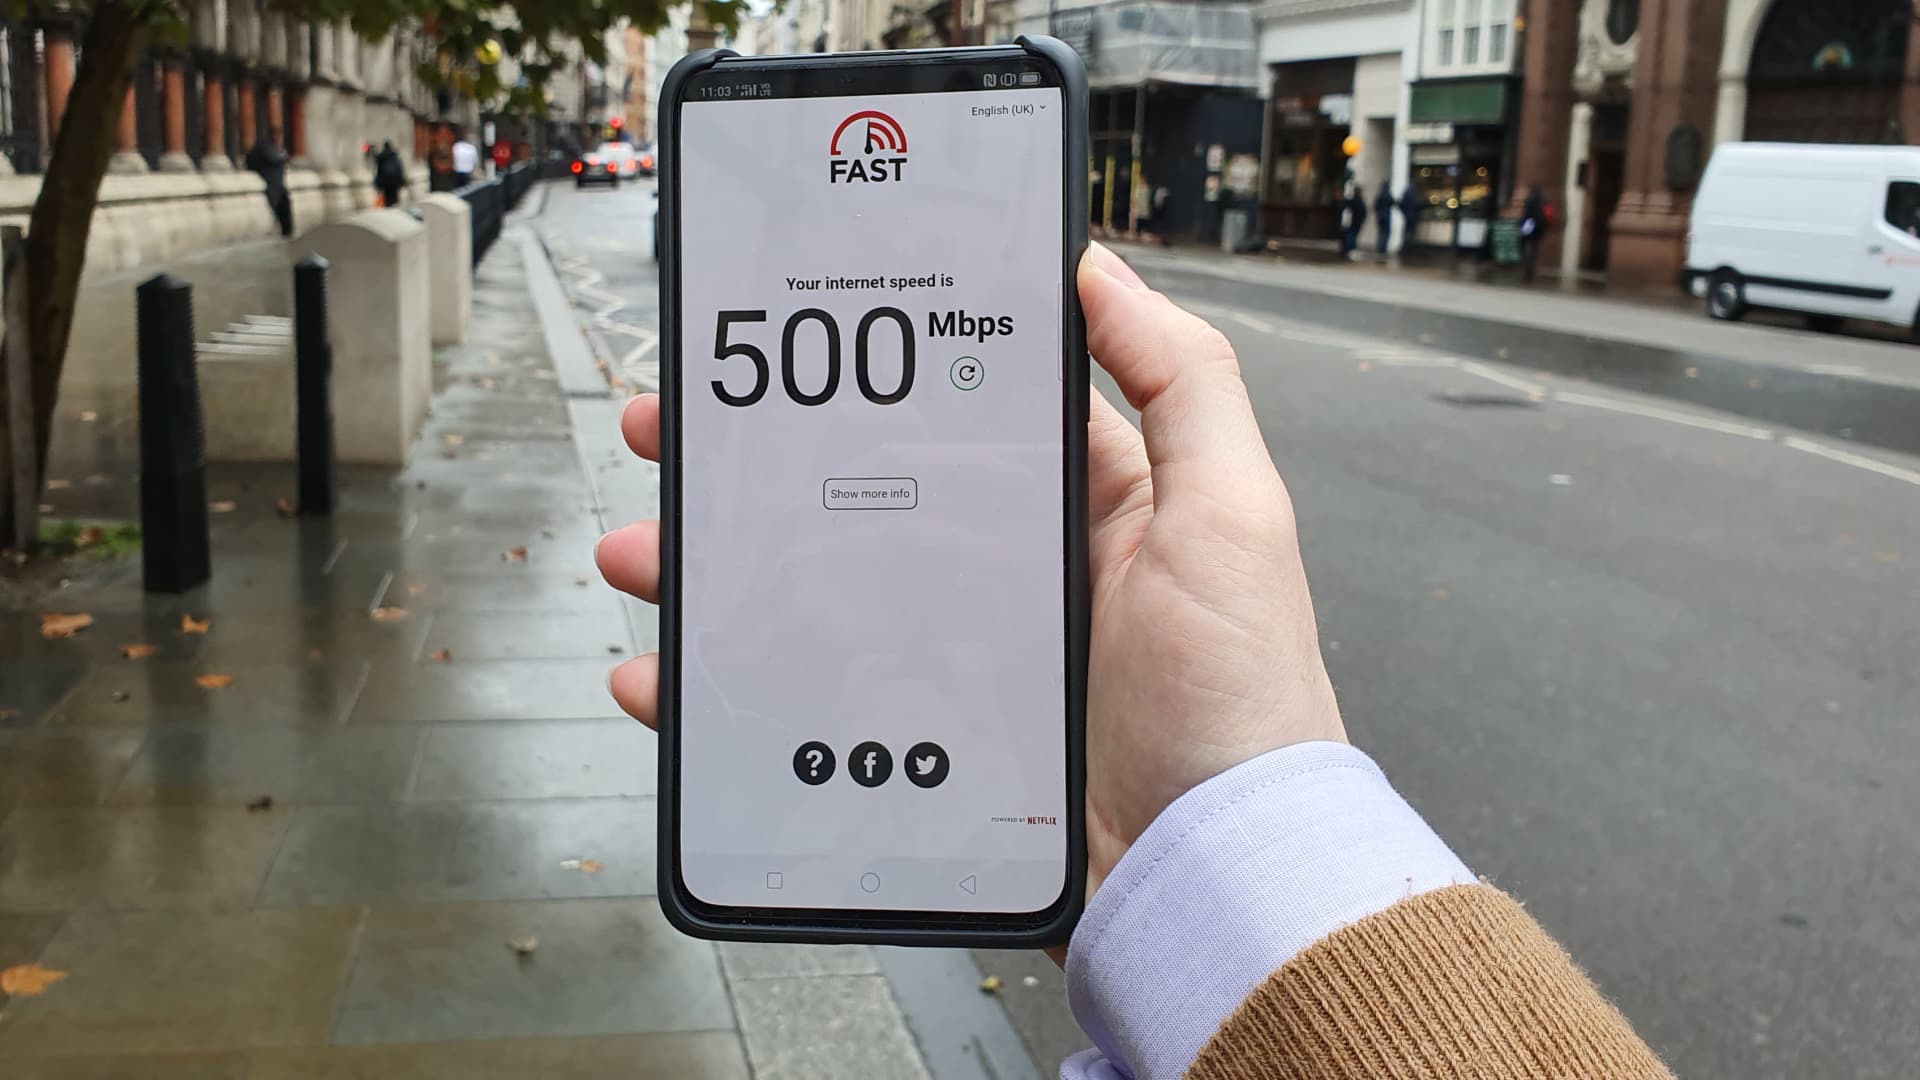 London lags behind rest of Europe on 5G network quality, report finds